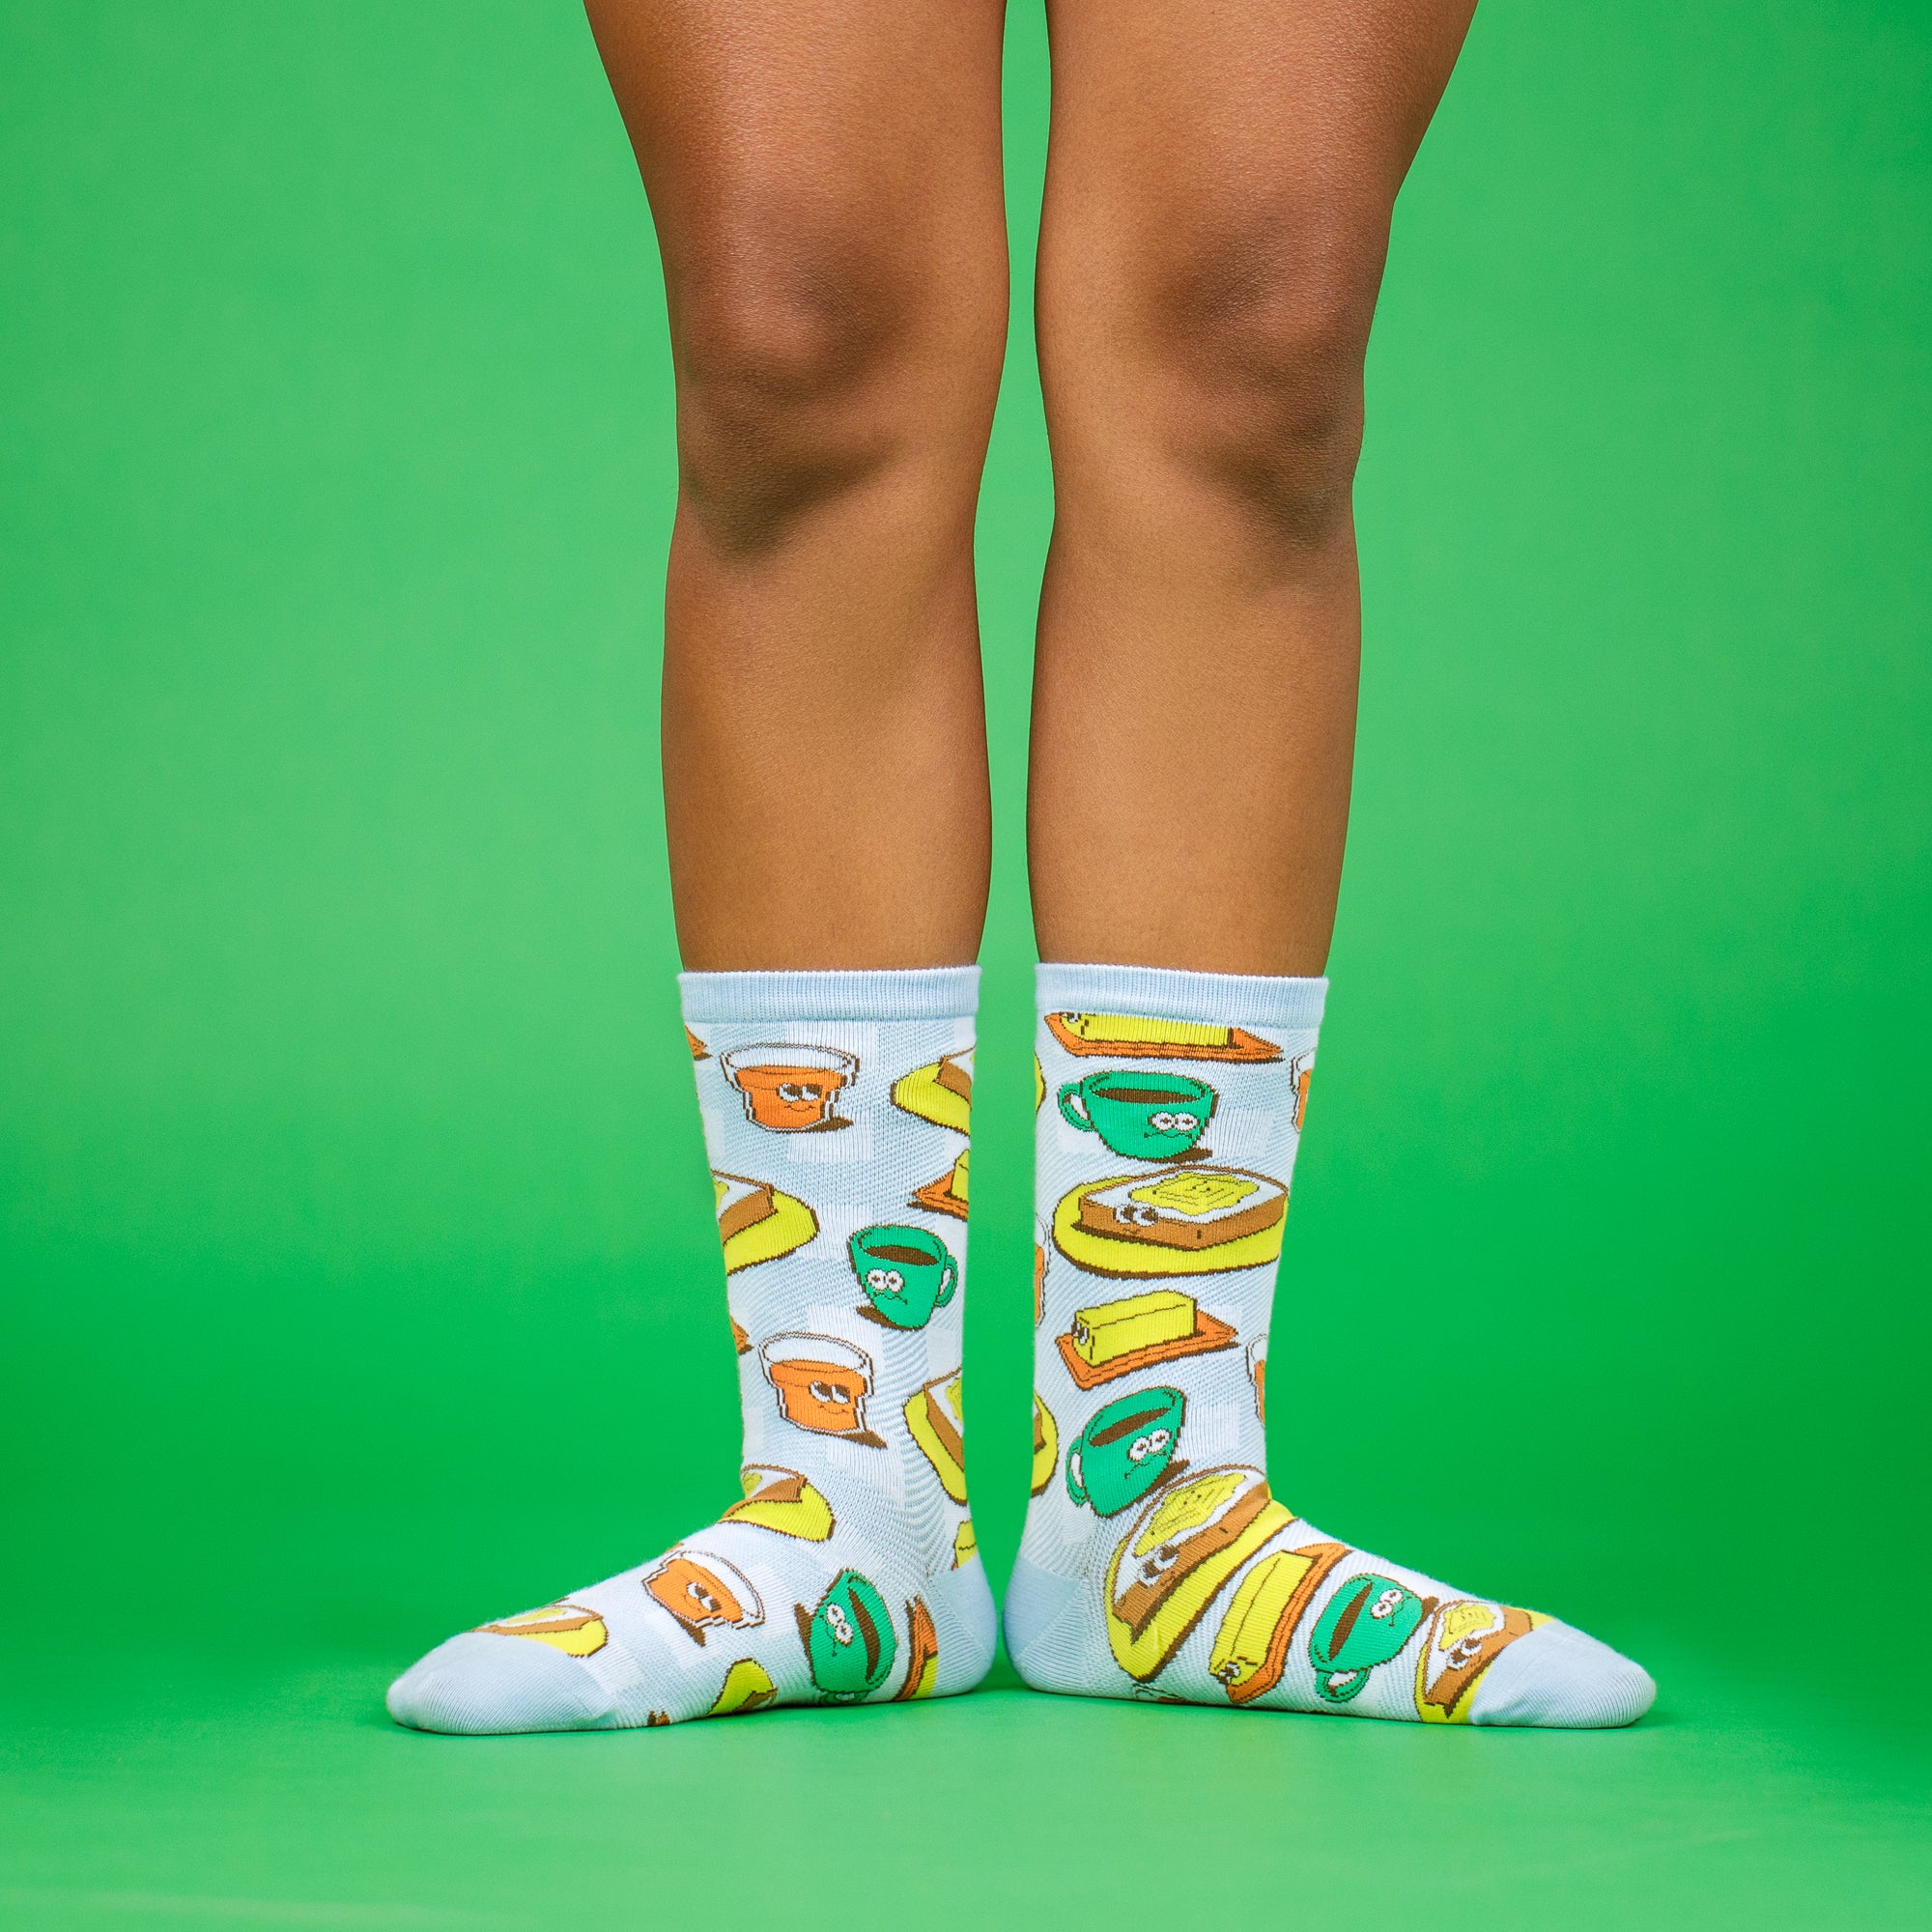 A green background showing two legs from the knee down in a ballet first position pose, wearing ankle socks from the Awesome Socks Club with colorful illustrations of toast, butter and coffee. 